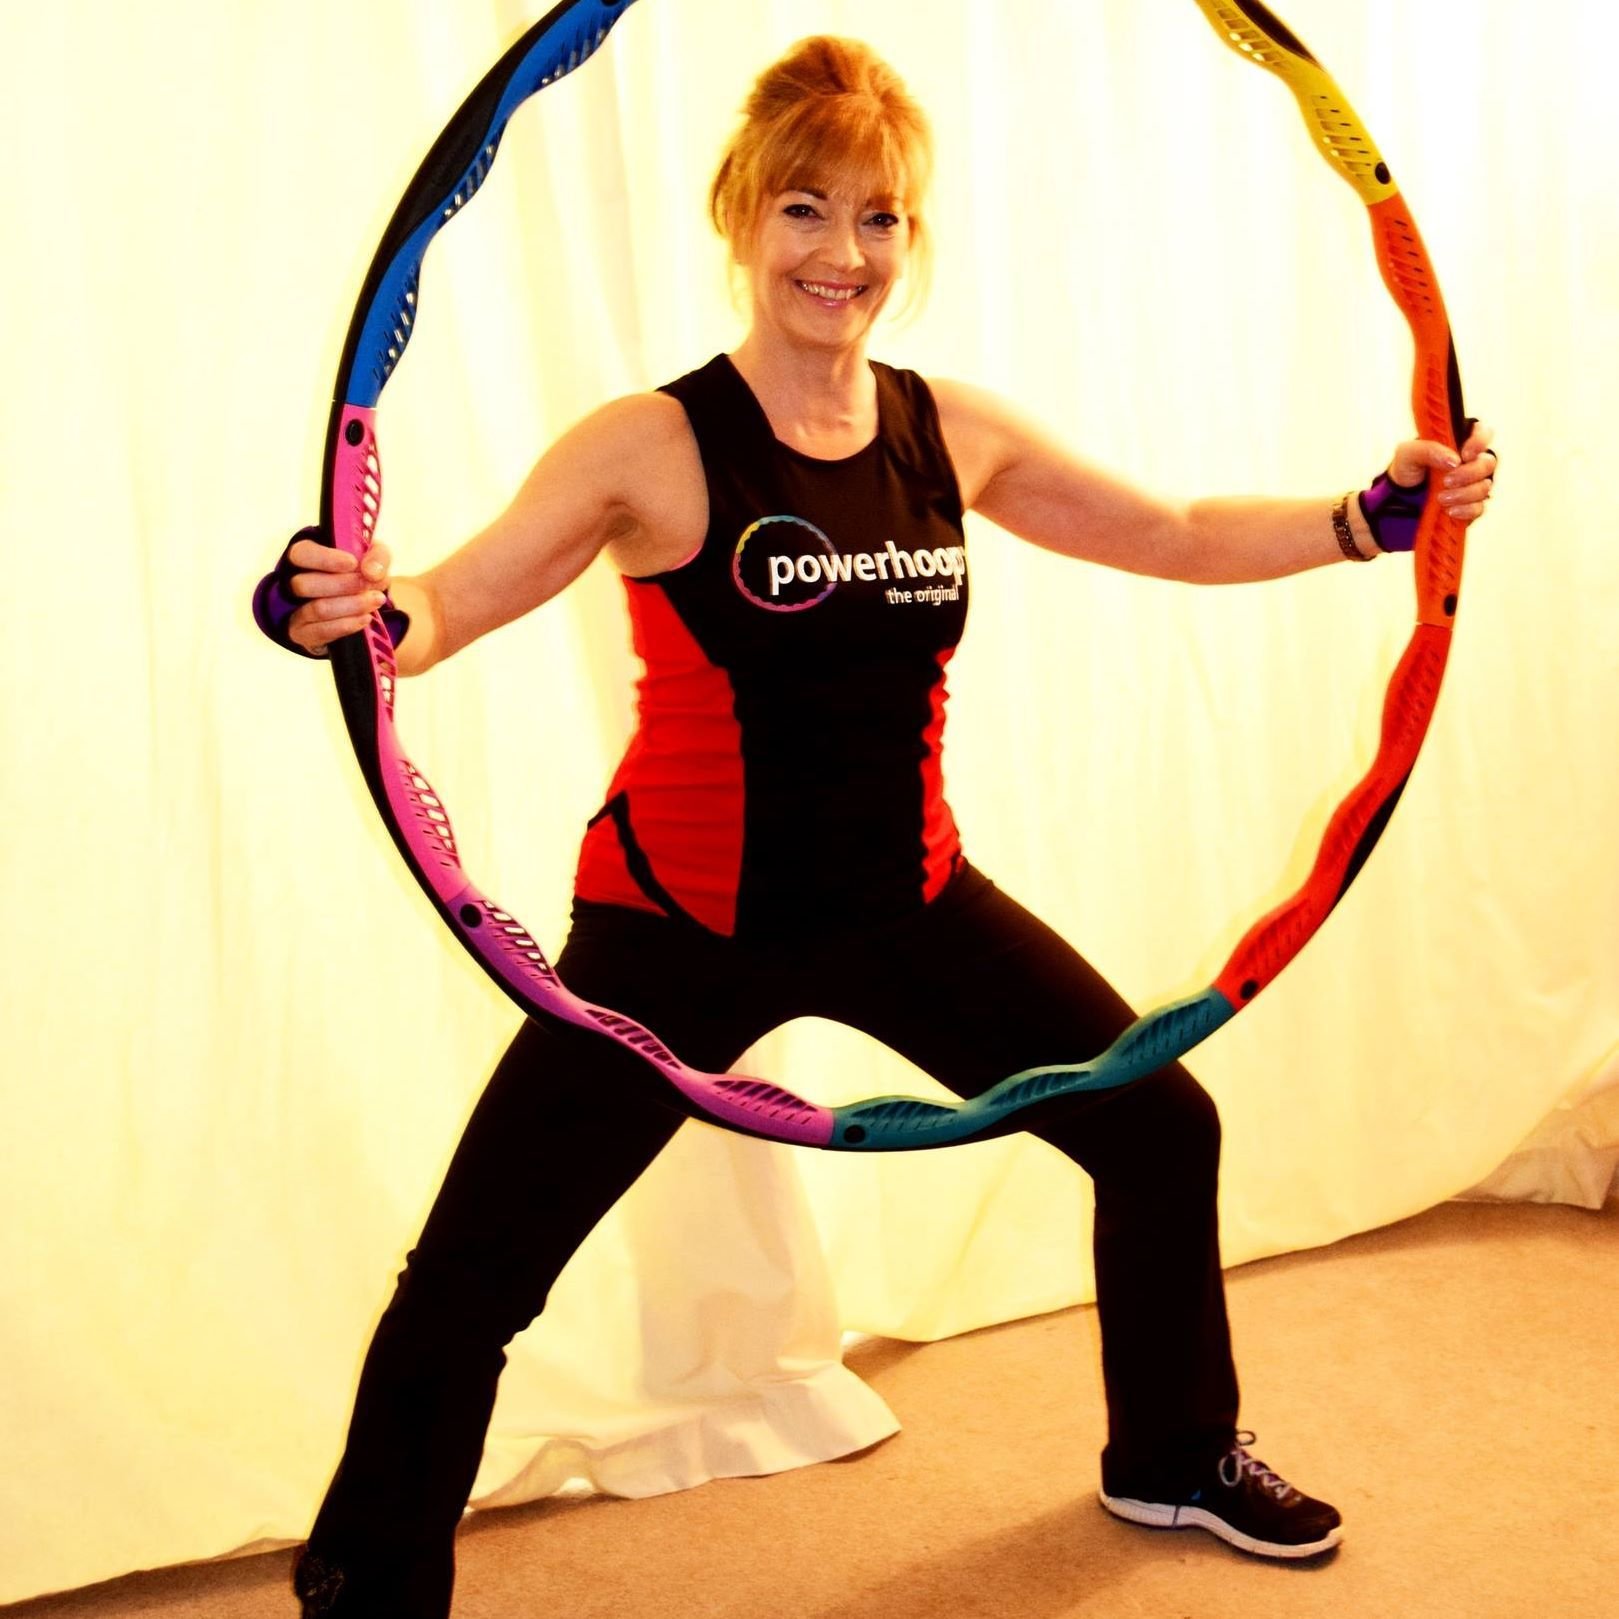 Fitness Professional bringing fun into fitness & fitness to YOU into the community. Powerhoop, Pilates & Yoga